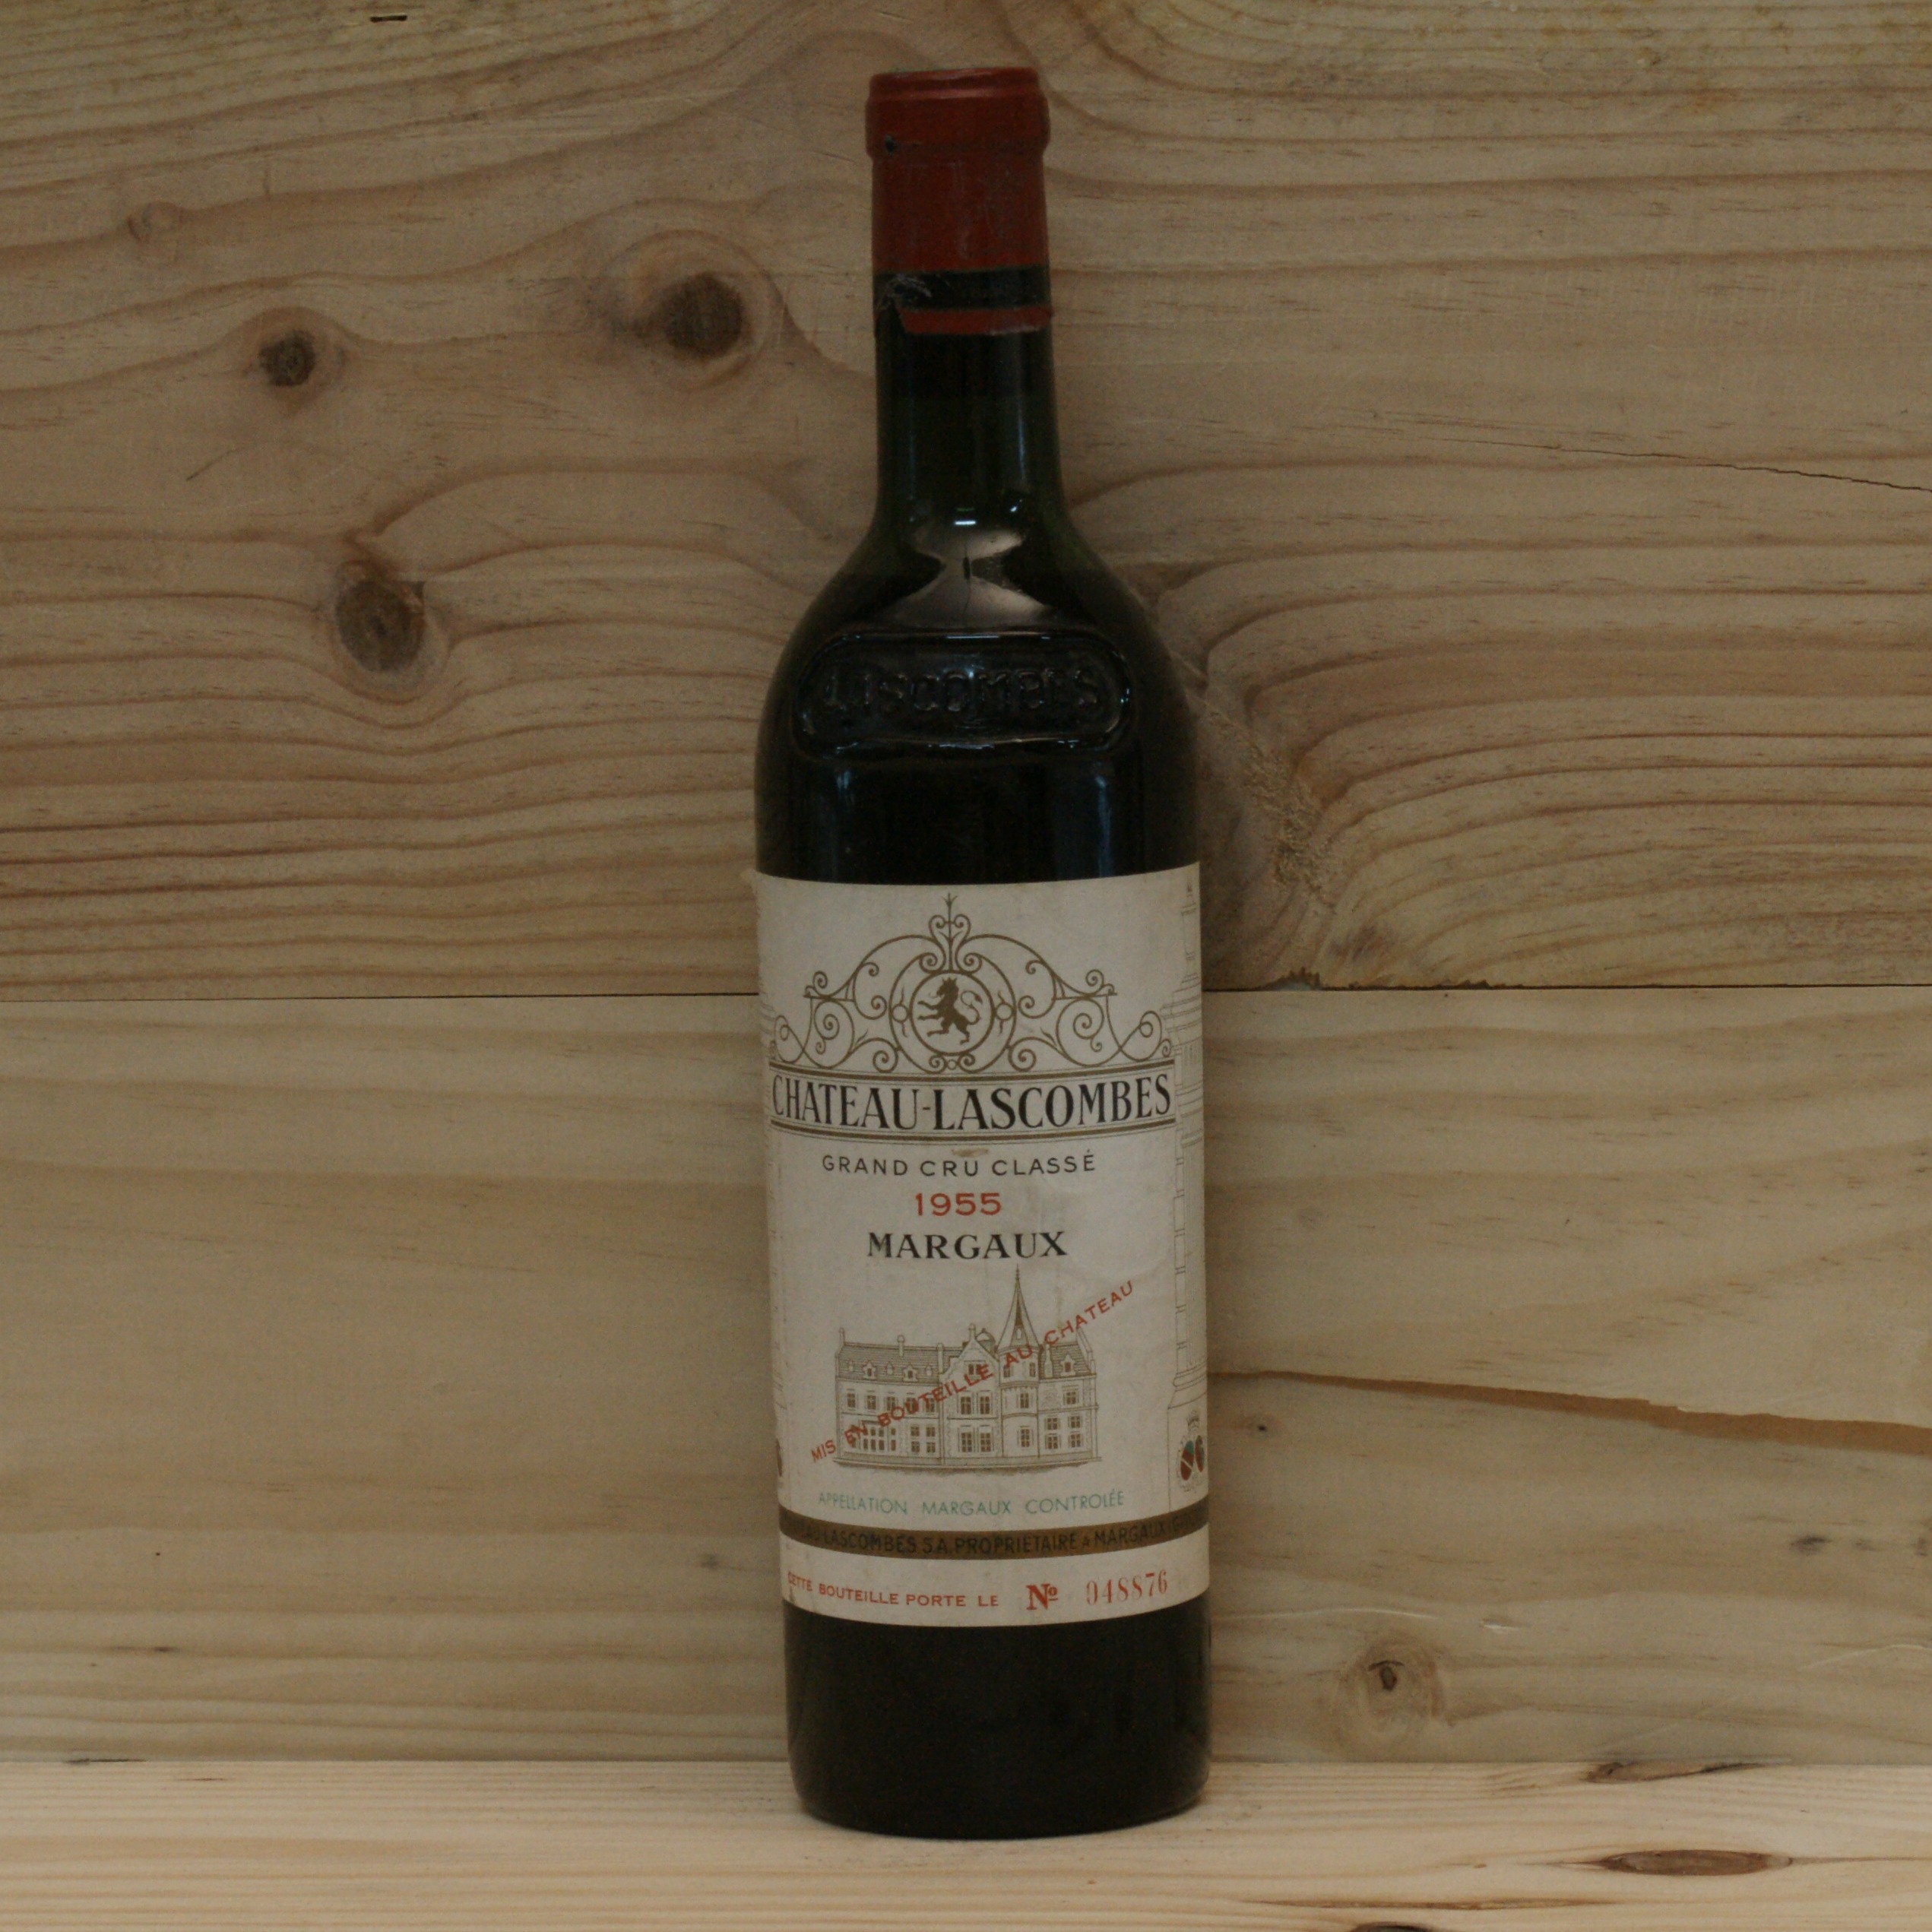 1955 Chateau Lascombes